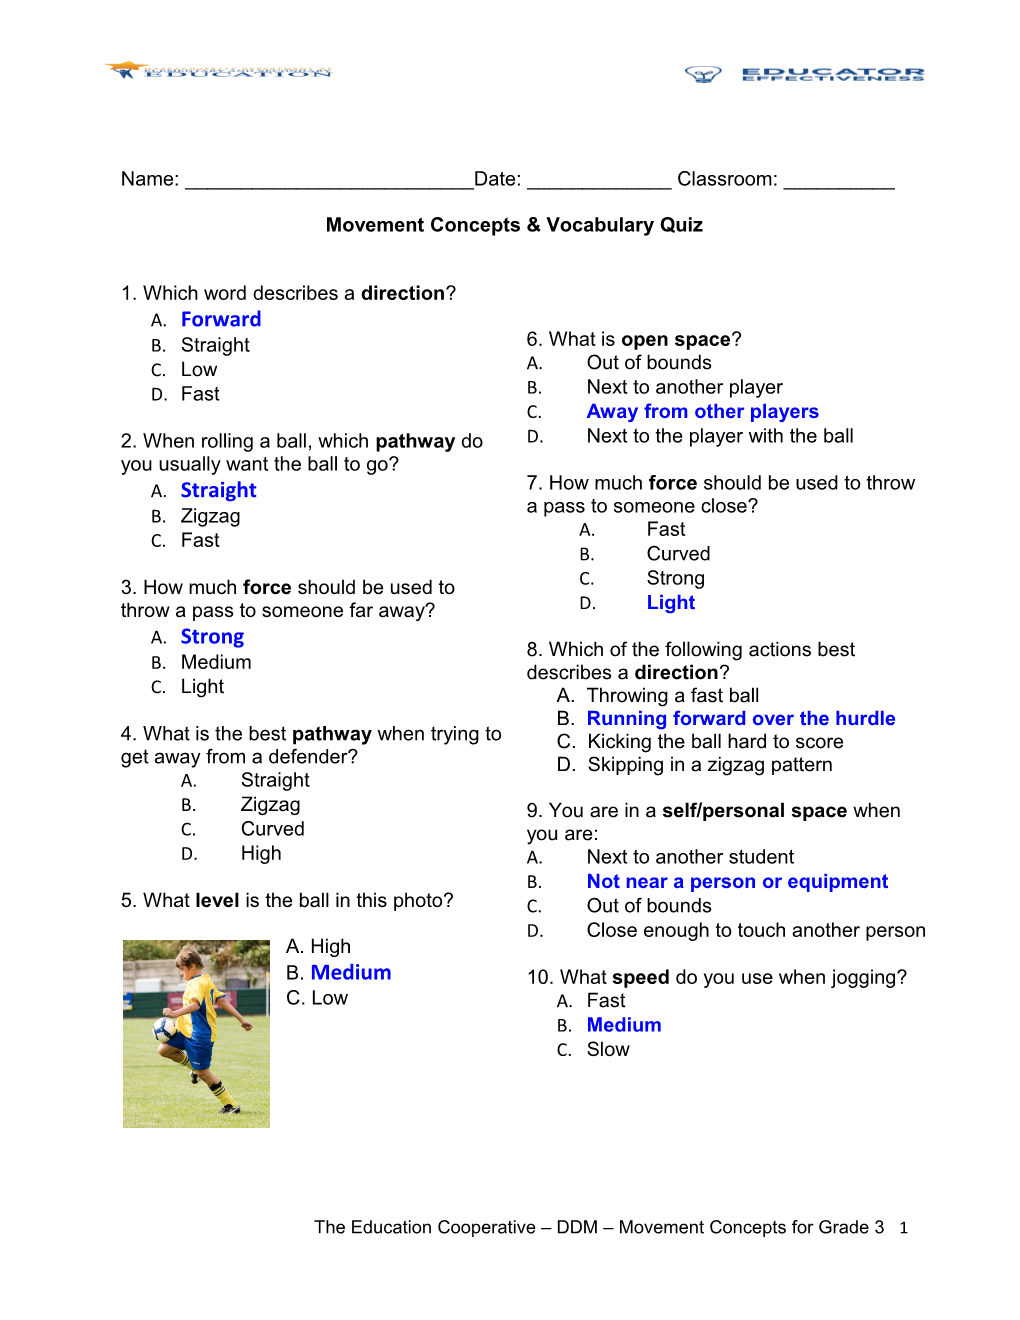 Example Common Measure: Assessment Movement Concepts for Grade 3